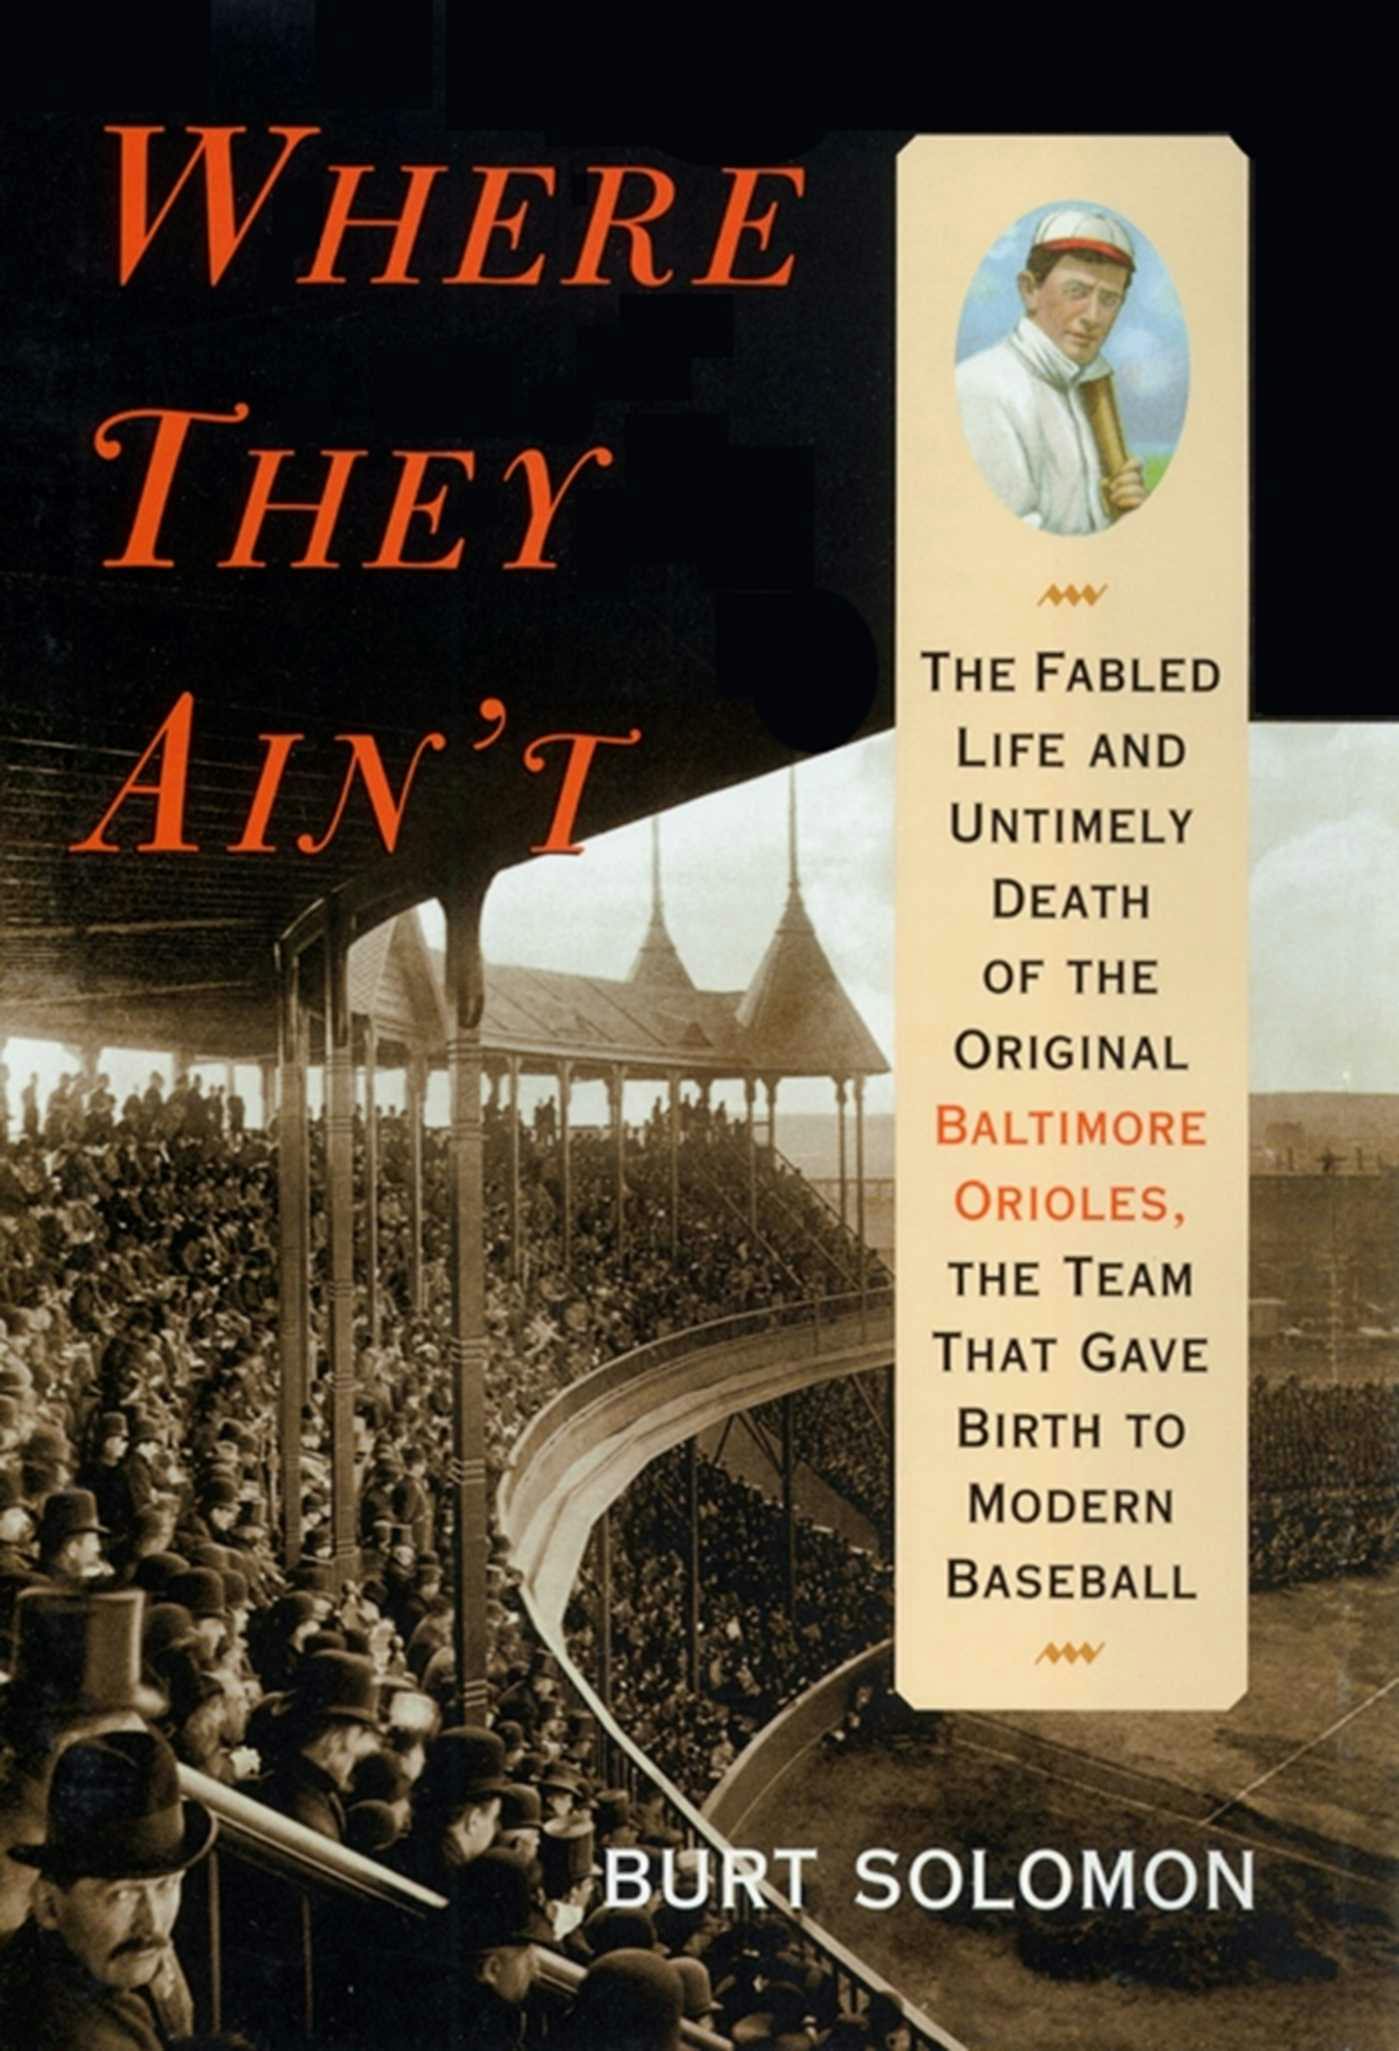 Where They Ain't: The Fabled Life and Ultimely Death of the Original Baltimore Orioles, the Team that Gave Birth to Modern Baseball - Burt Solomon